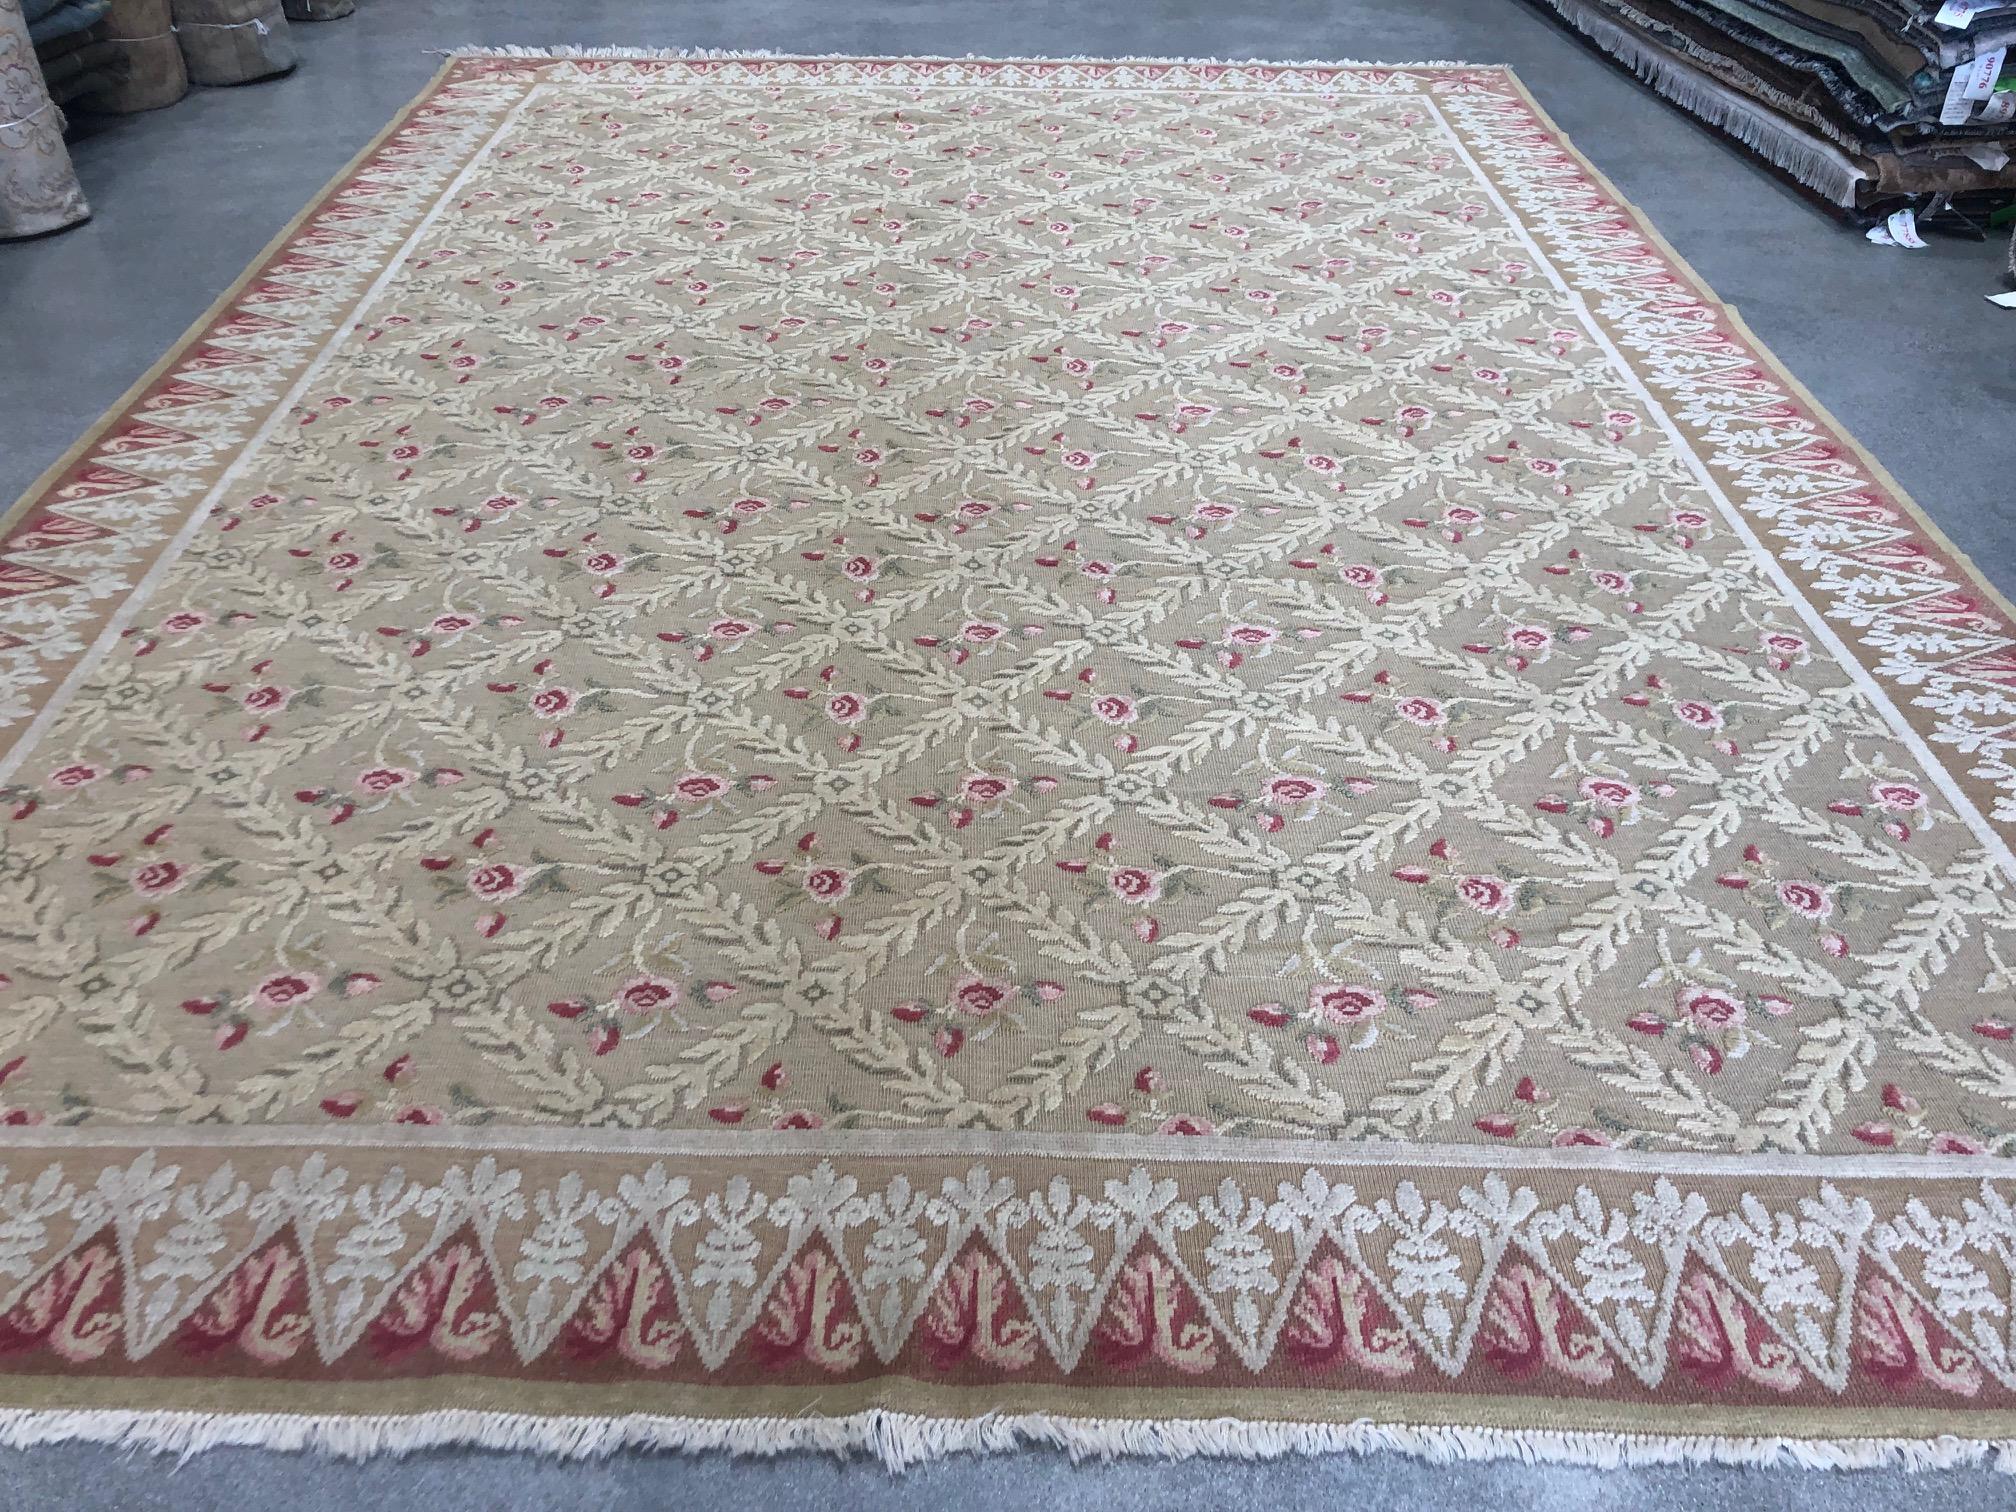 A trellis made of leaves and covered with roses is the image that springs to mind in this hand knotted wool area rug from the popular European Design collection. The same rose tones figure prominently in the contrasting border frame that creates a